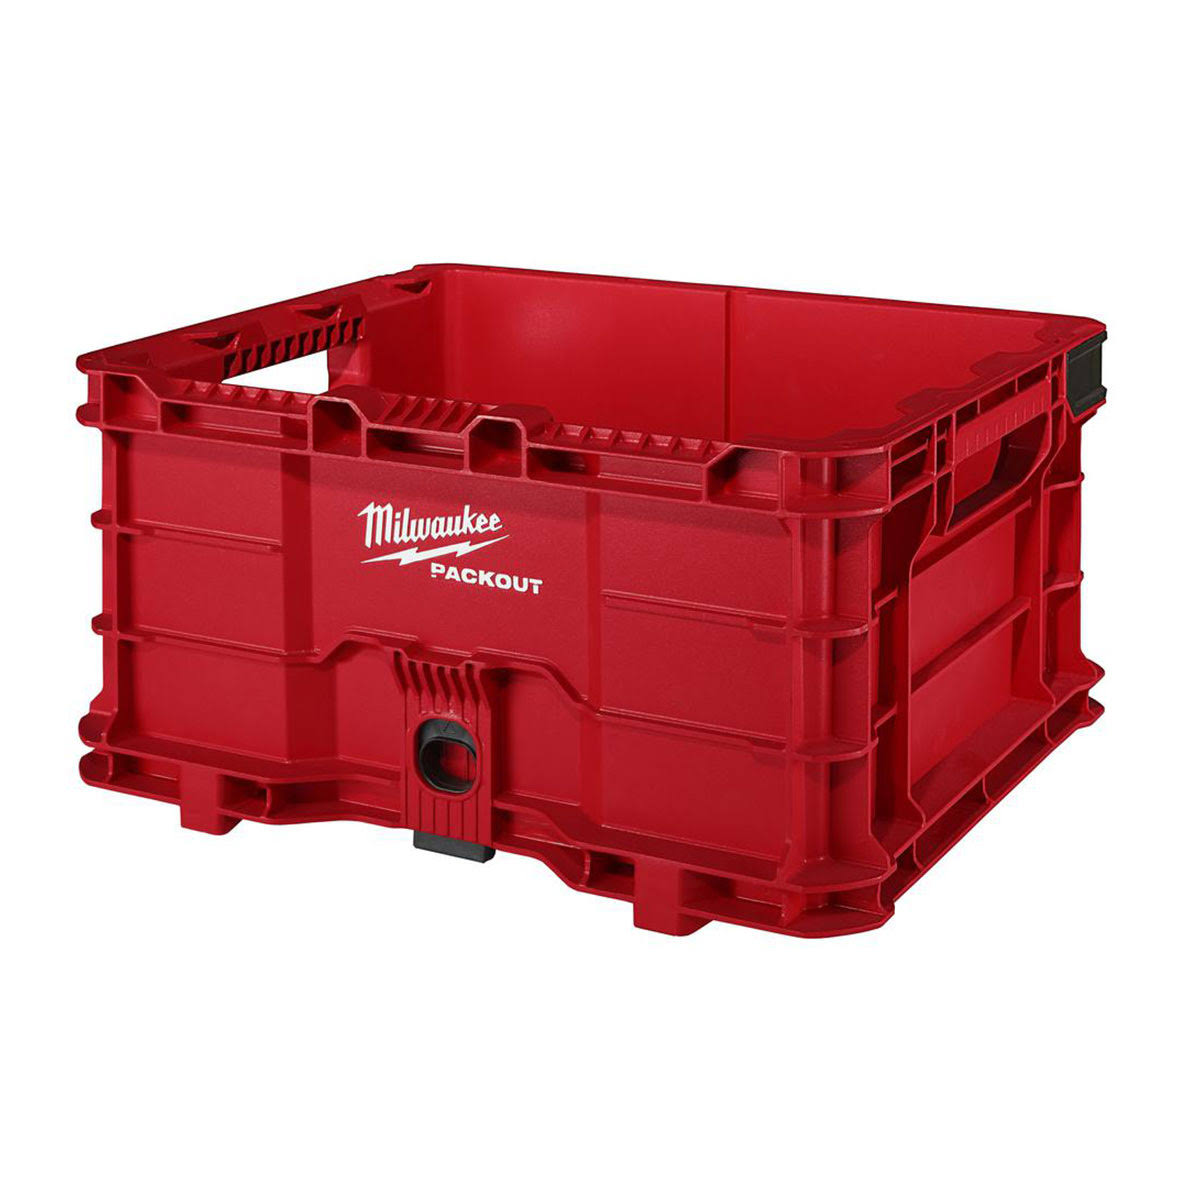 Milwaukee Packout Tool Storage Crate - Red